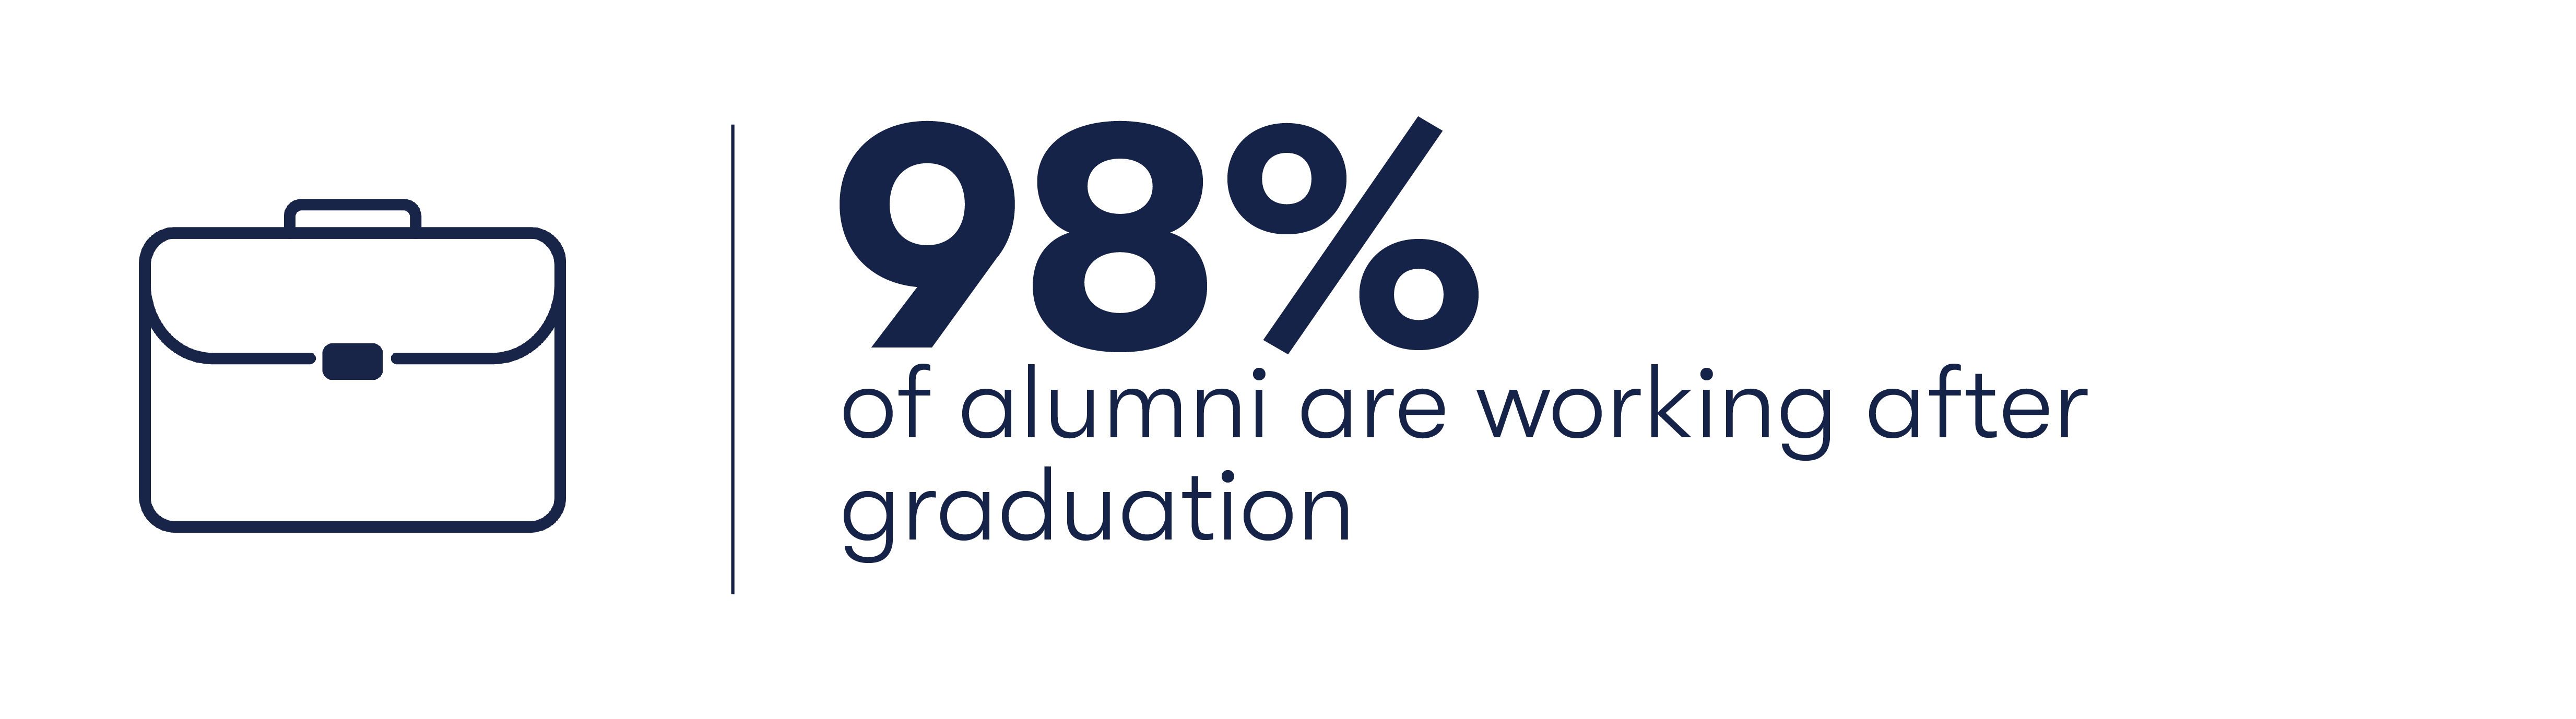 98% of people are working after graduation